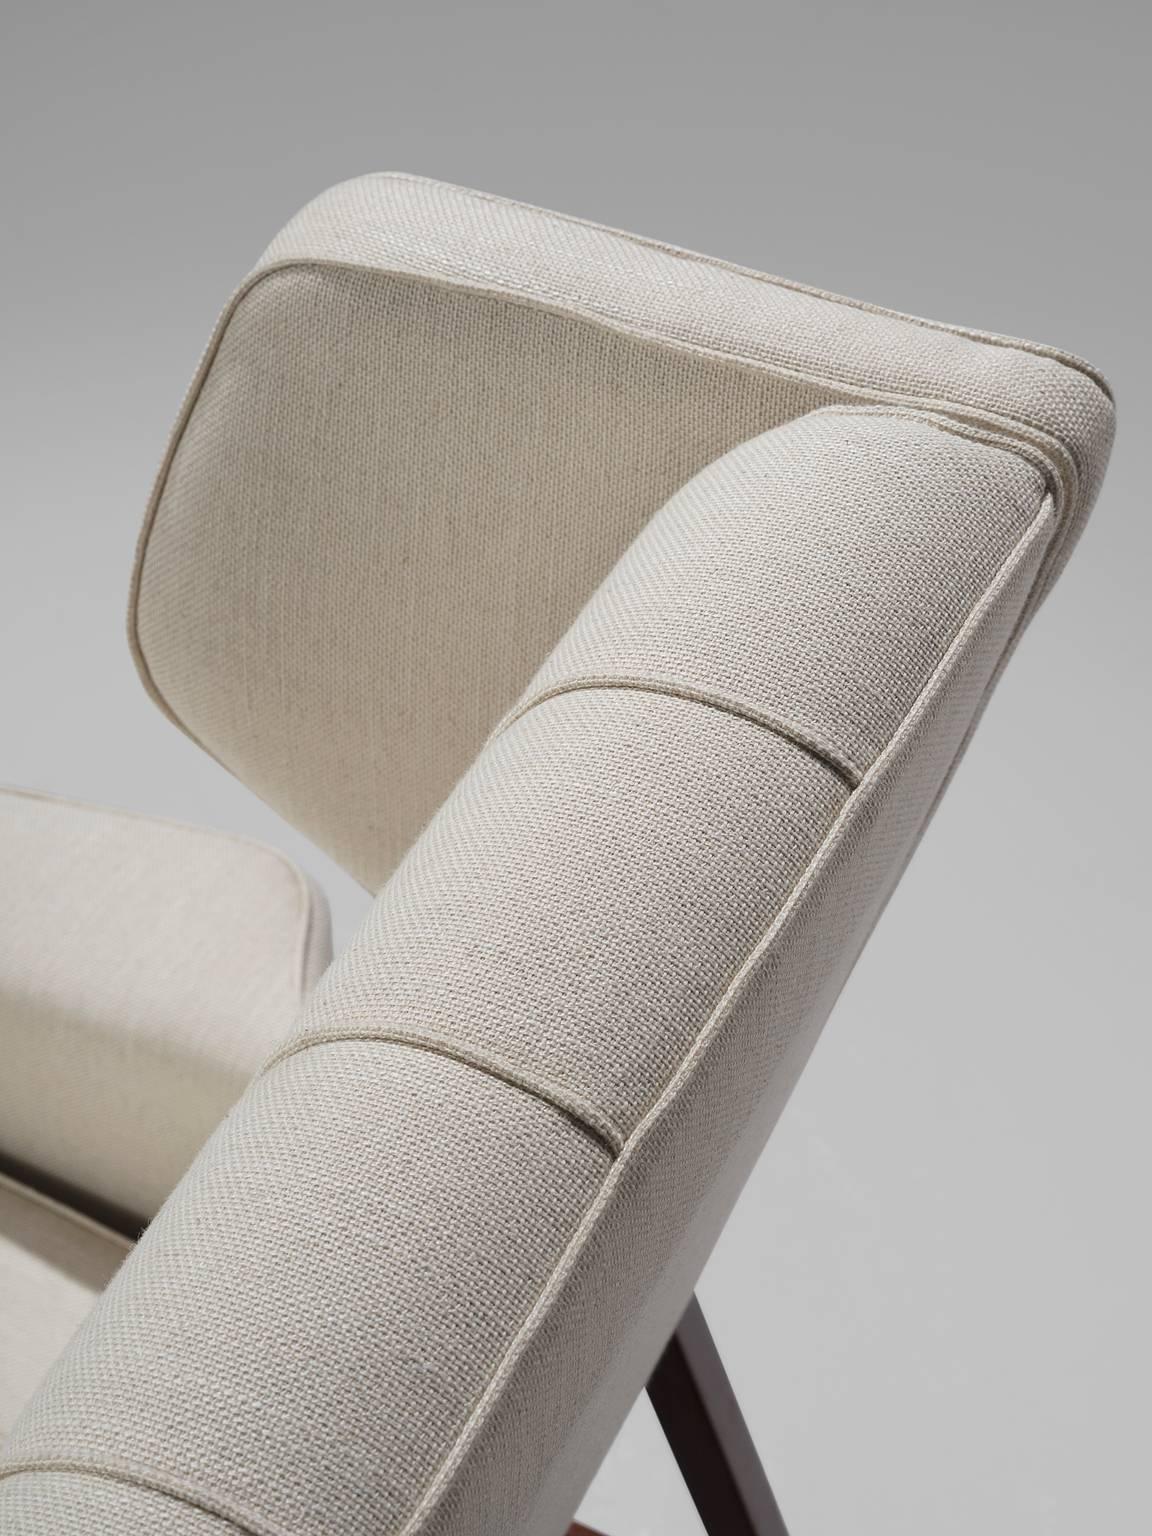 Gianfranco Frattini Reupholstered Lounge Chair for Cassina 2